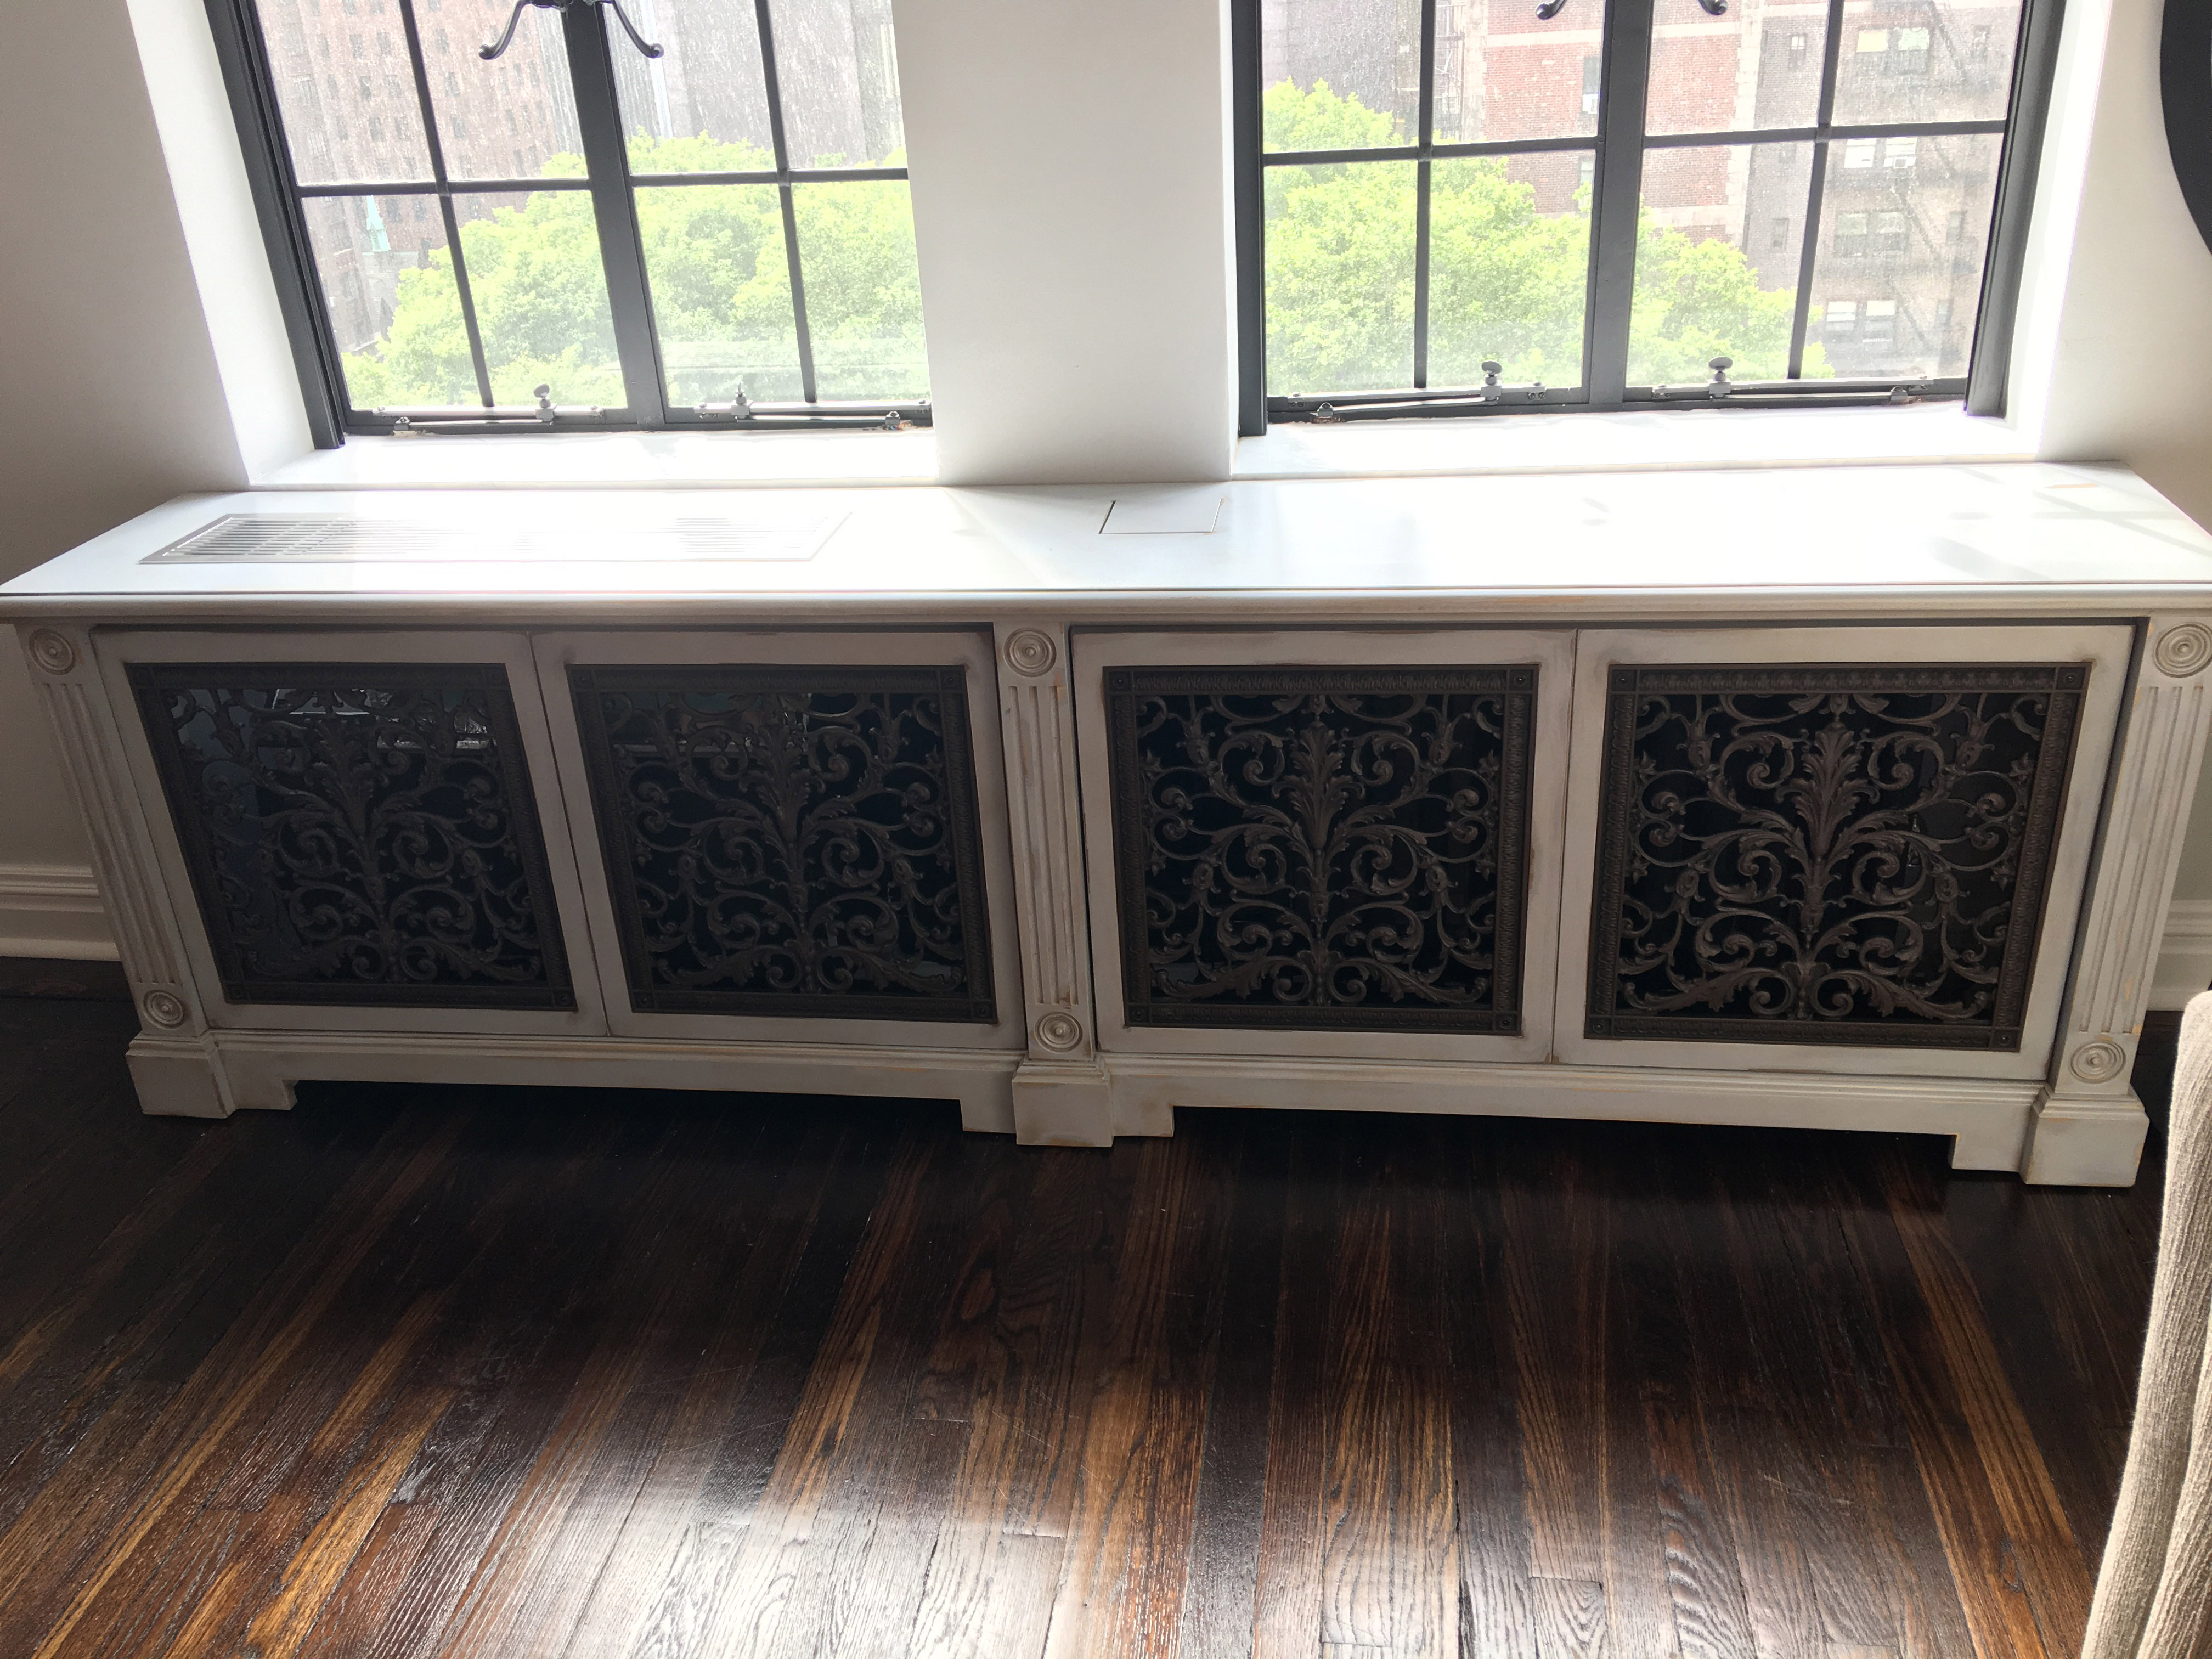 After picture with Louis XIV decorative grilles to cover the air conditioner and radiator.